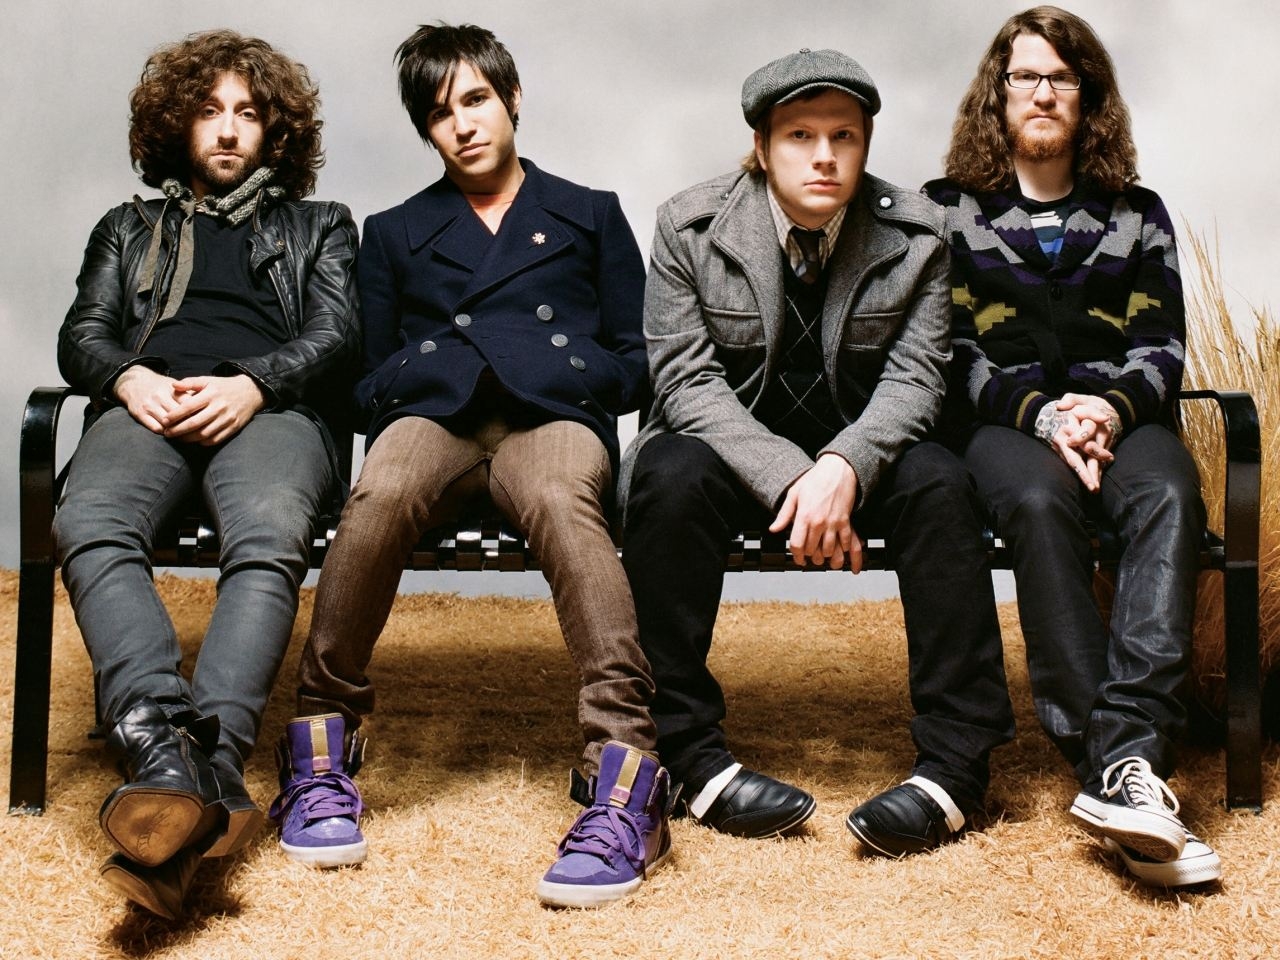 Fall Out Boy HD Wallpaper Image Pictures To